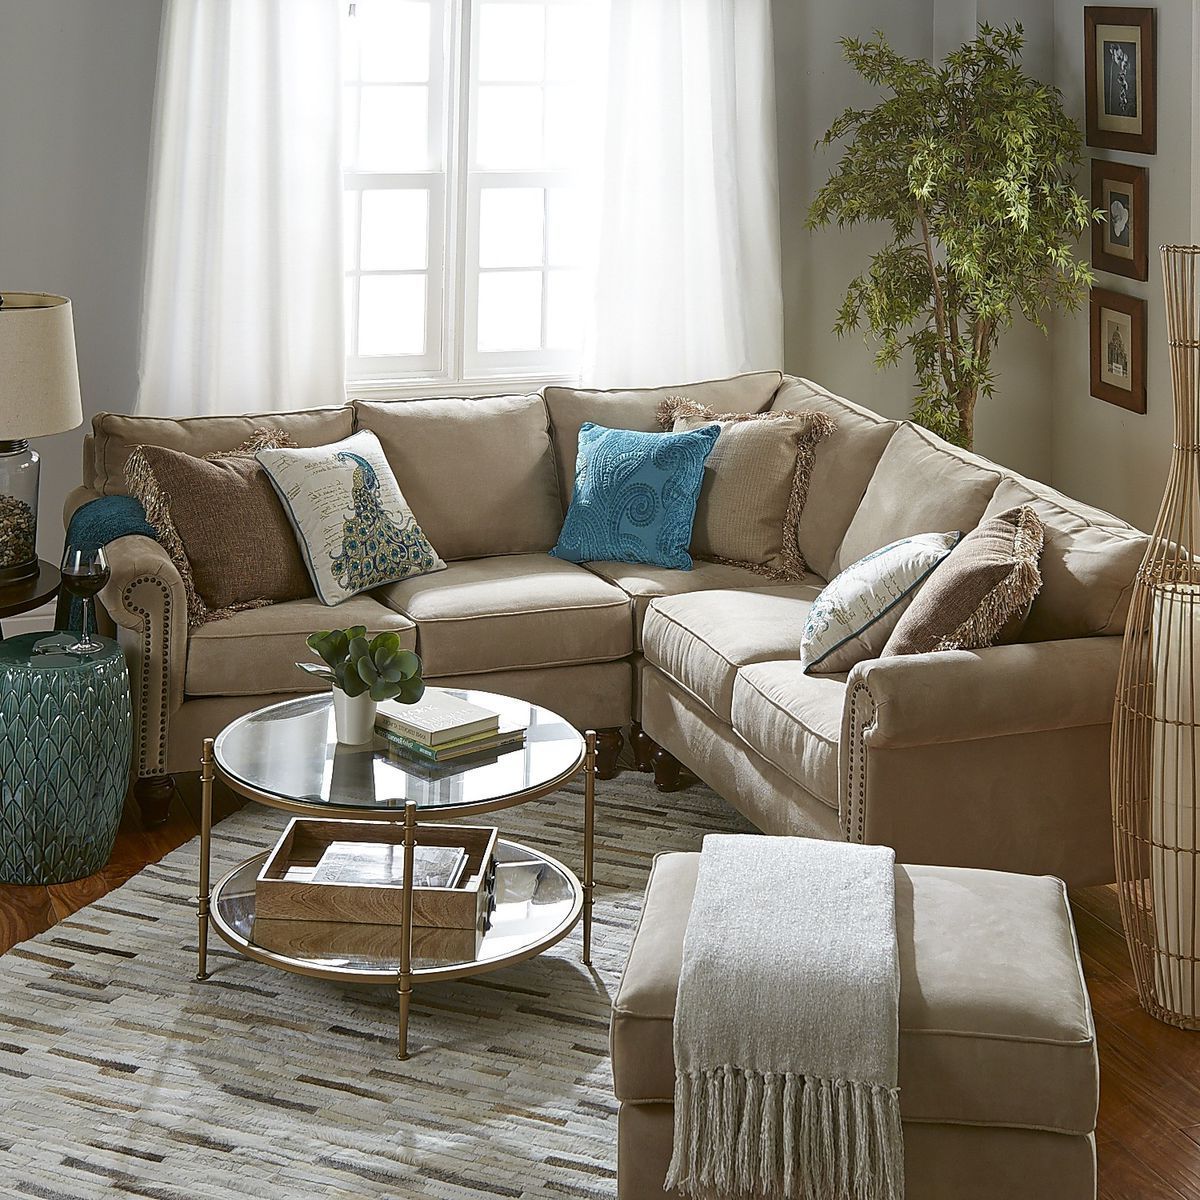 Favorite Small L Shaped Sectional Sofas In Beige Intended For Alton Ecru 3 Piece L Shaped Sectional (View 11 of 15)